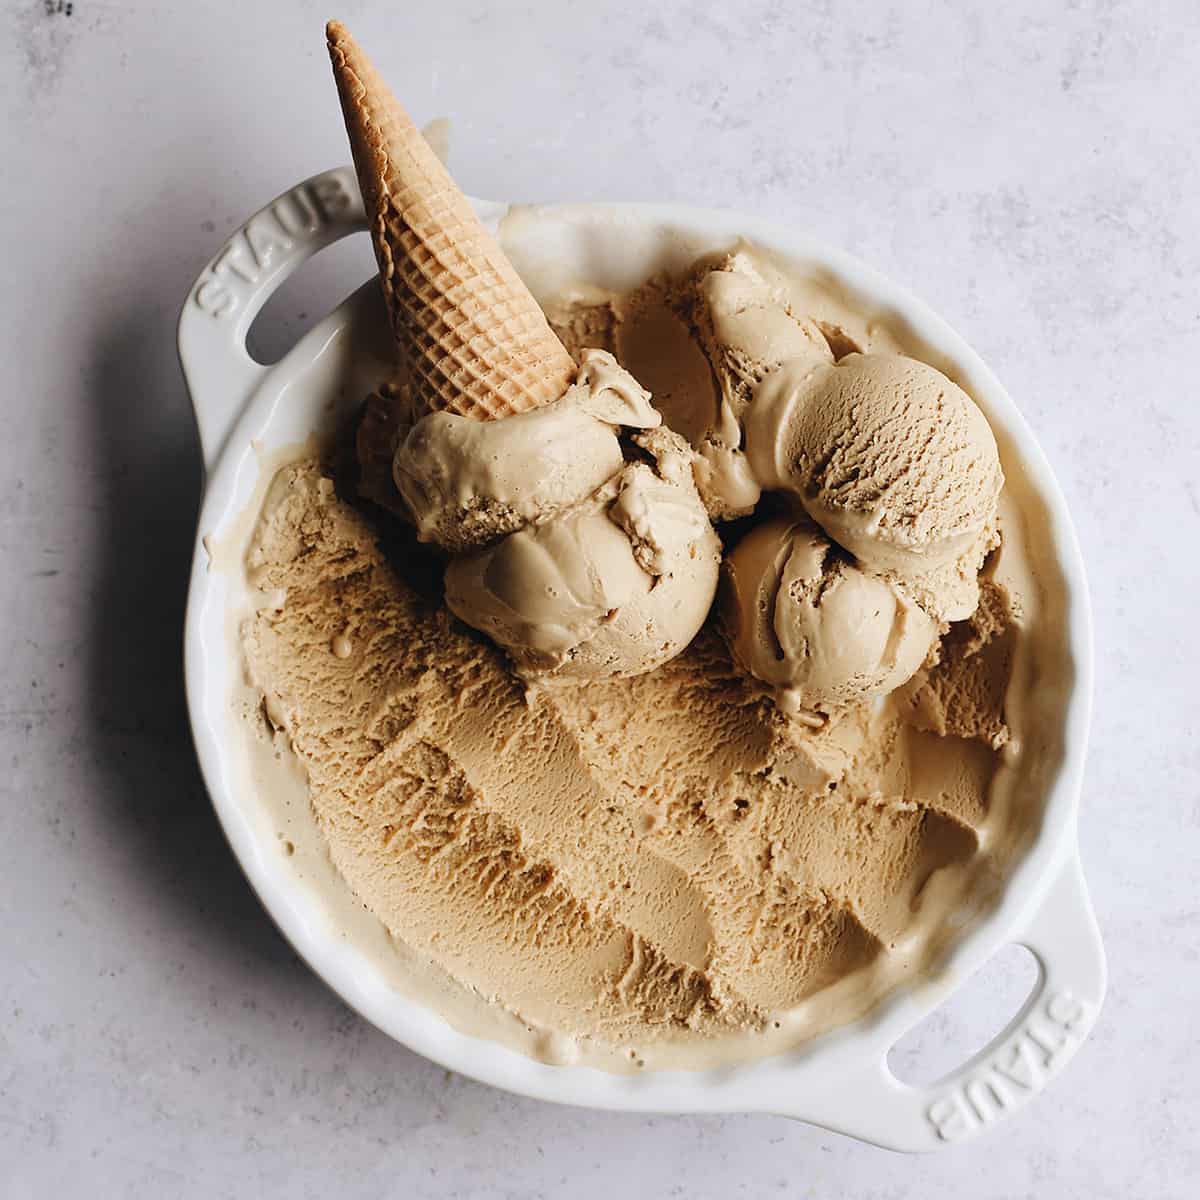 five scoops of Coffee Ice Cream with an ice cream come in a white dish